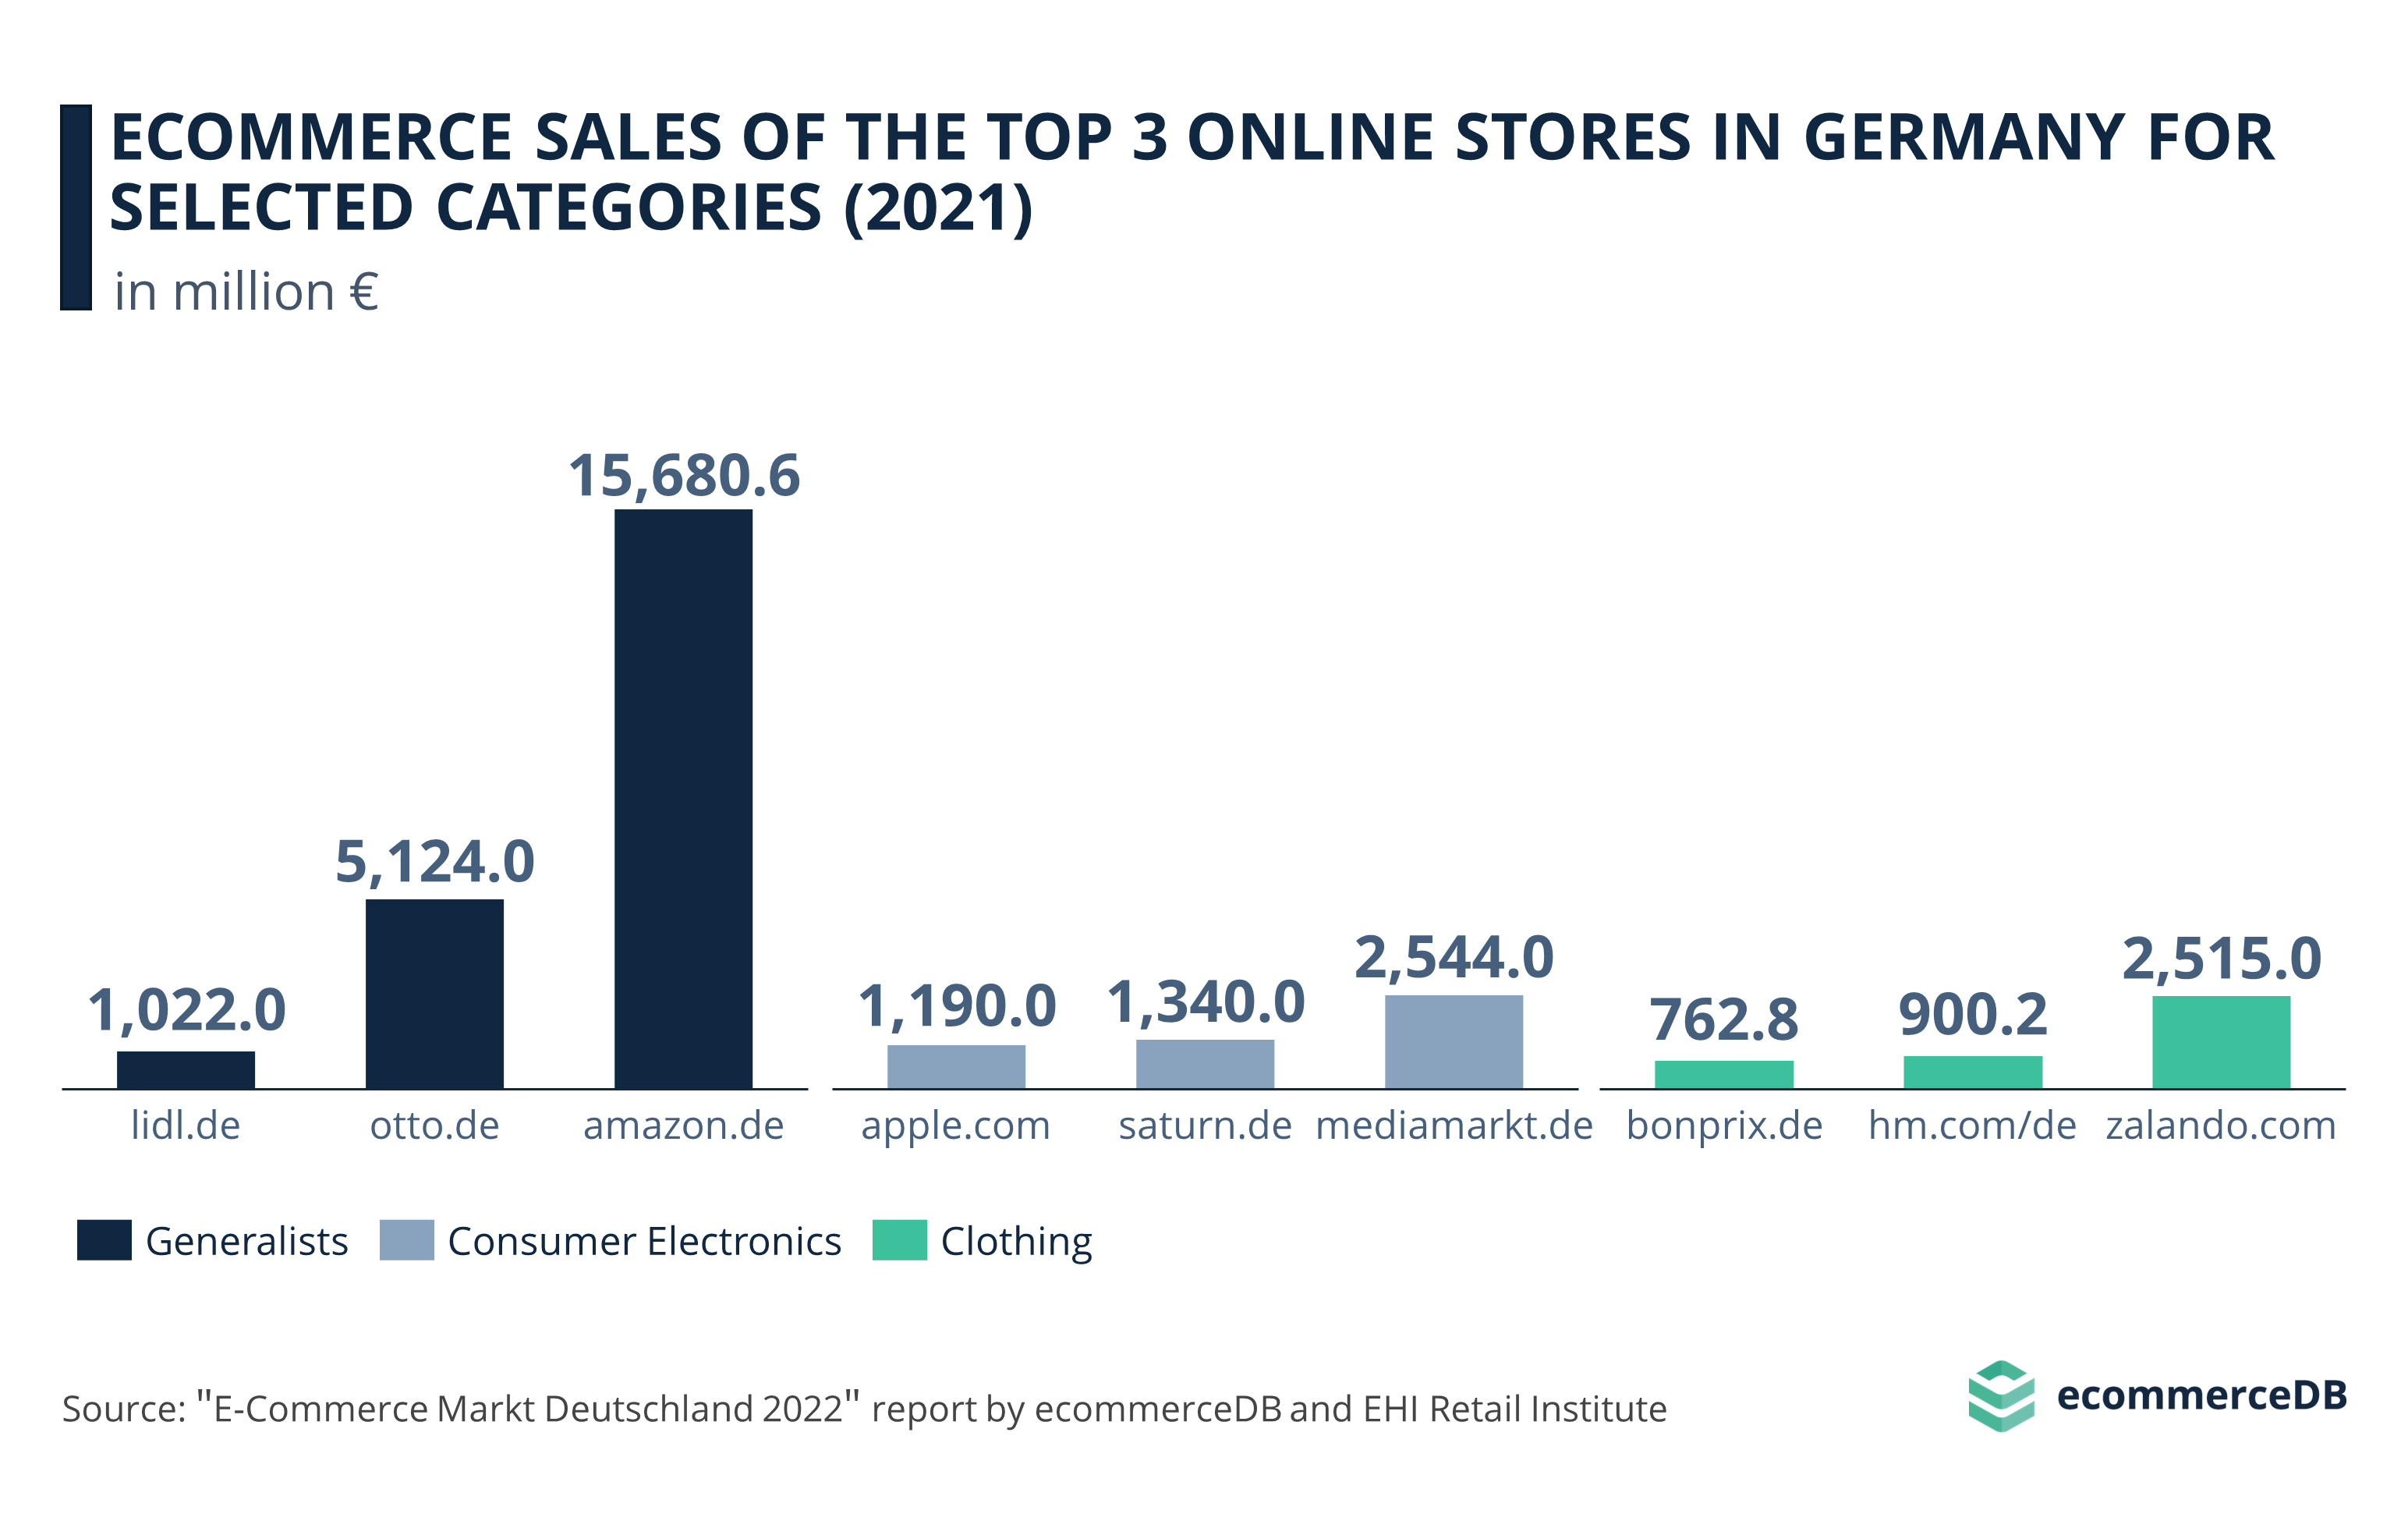 eCommerce Sales of the Top 3 Online Stores in Germany for Selected Categories (2021)